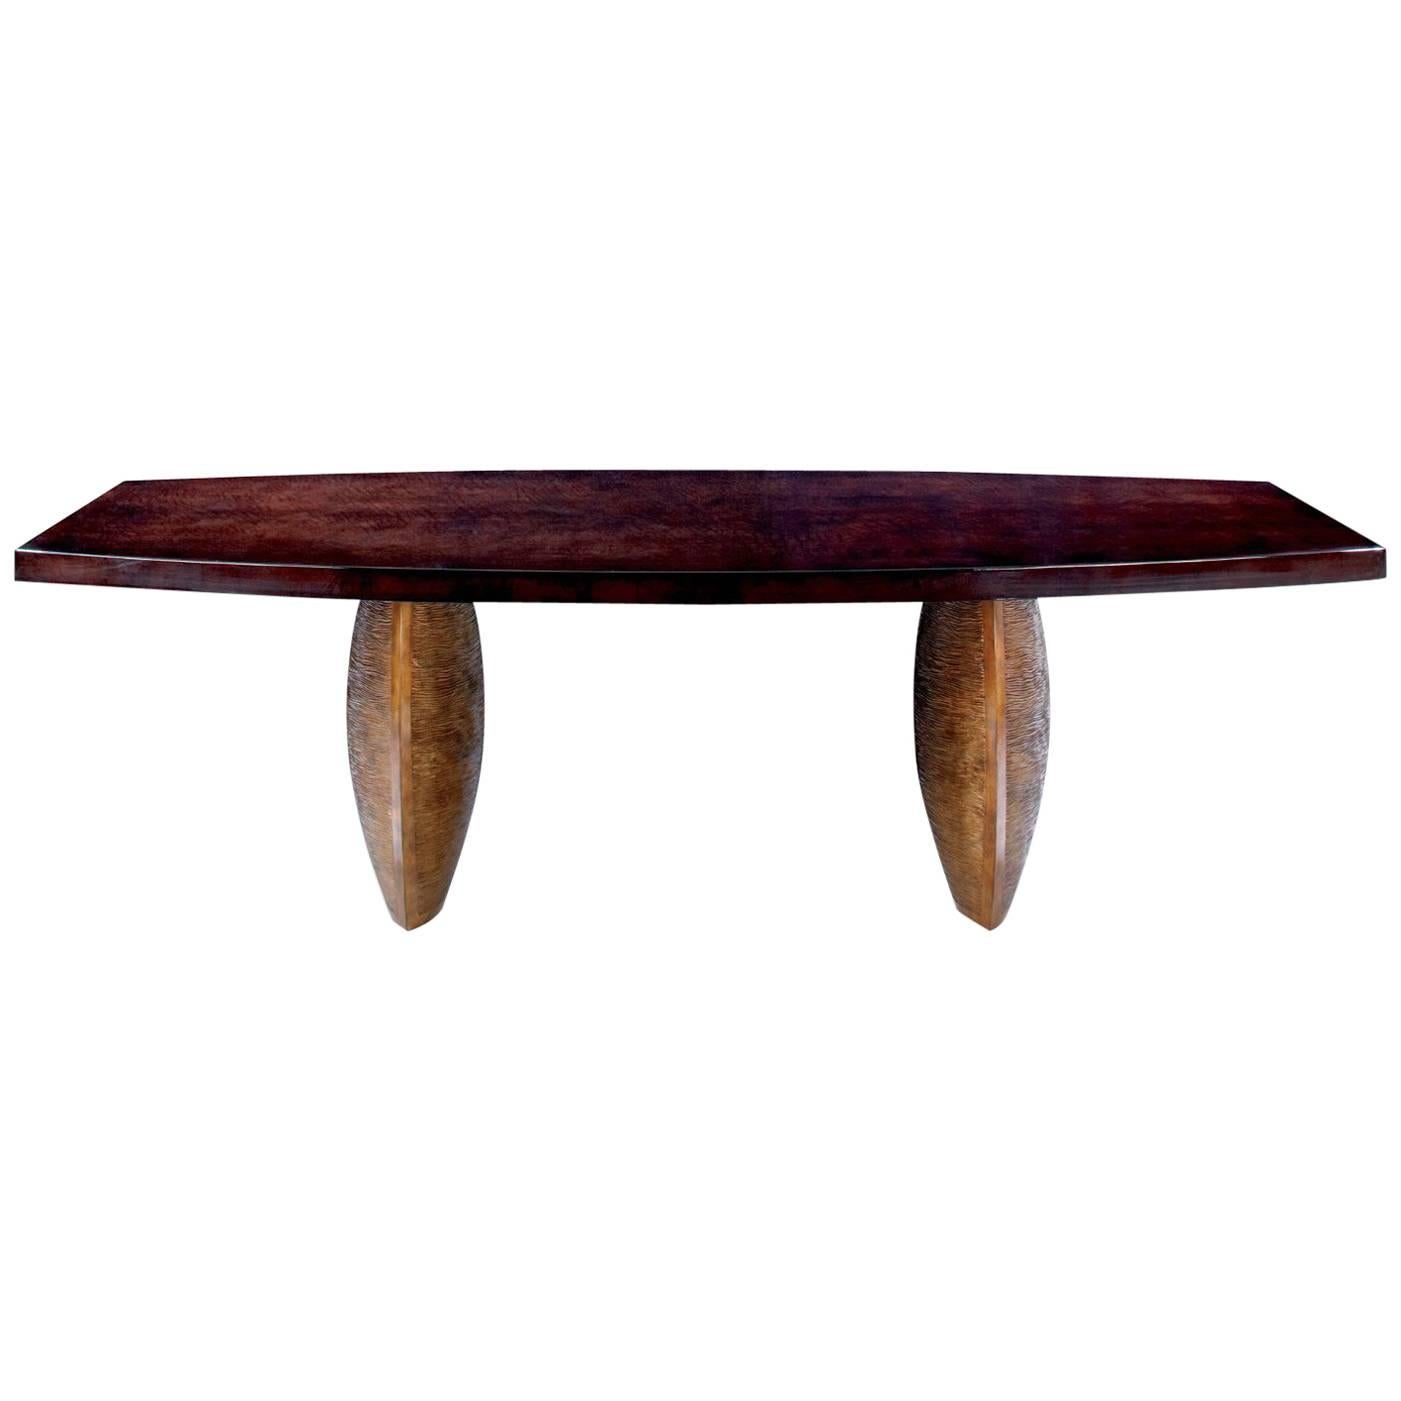 Dining Room Table Dogwood France Modern Contemporary Bronze Legs For Sale